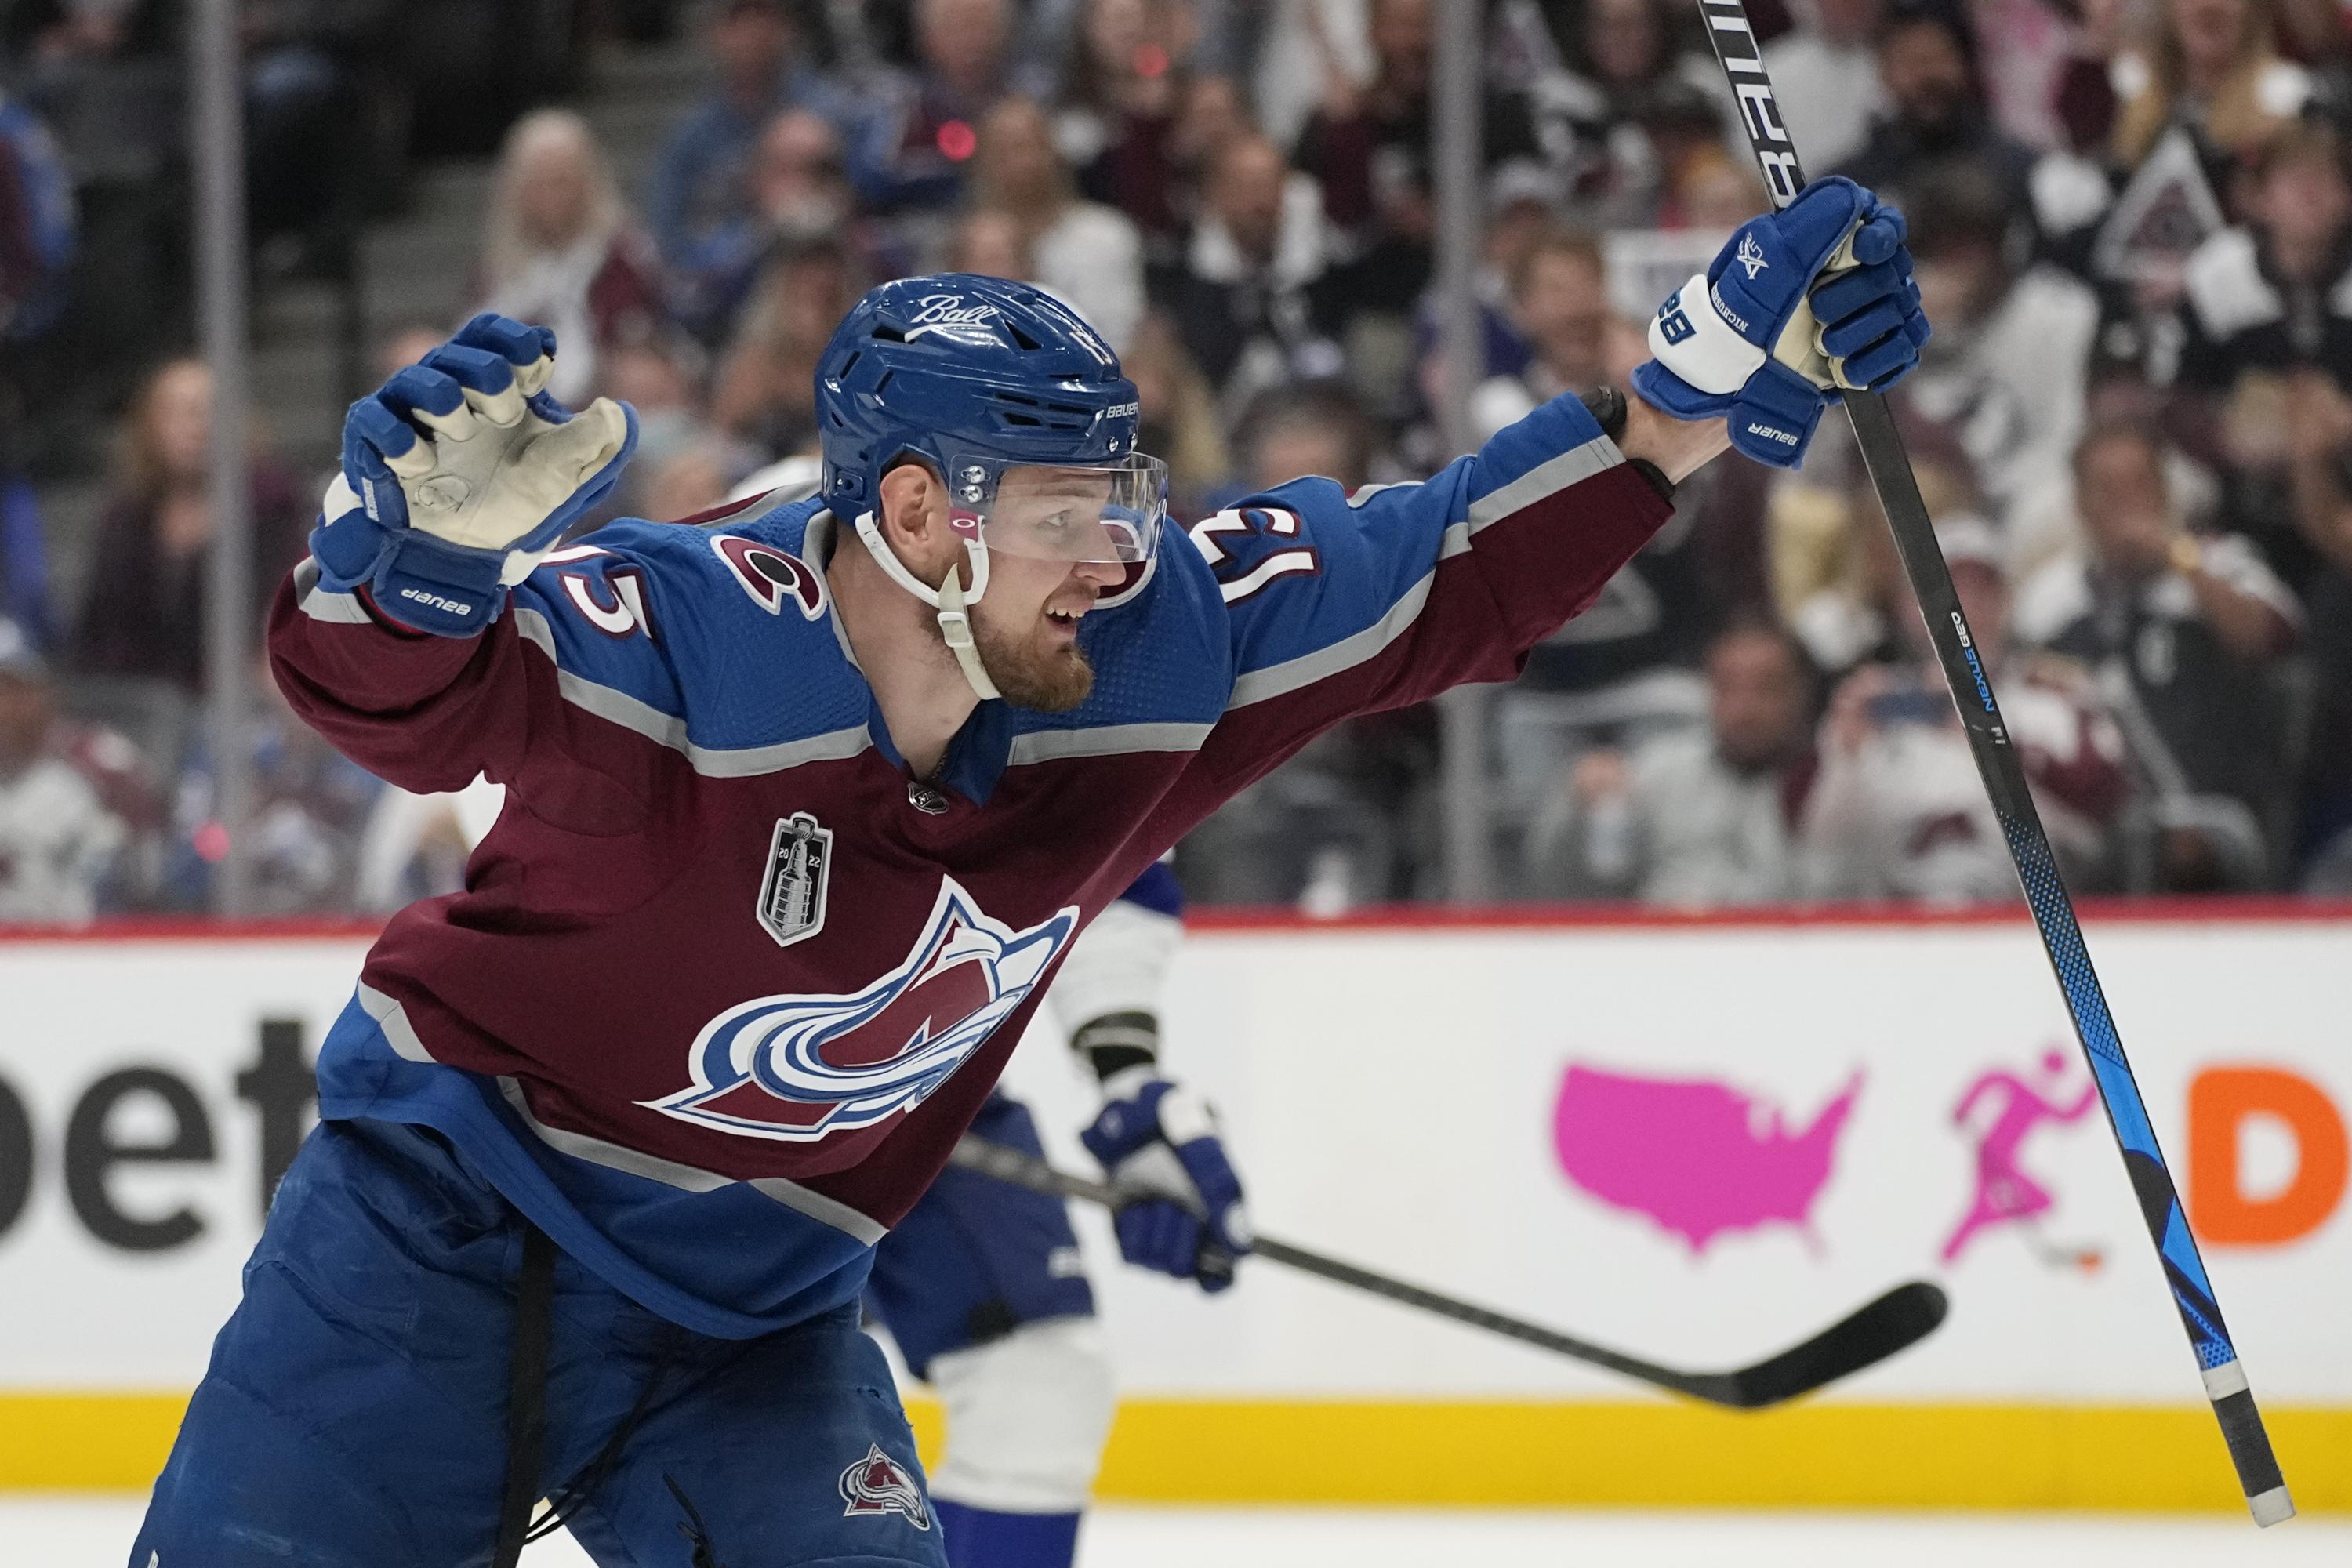 Nichushkin dominating for Avalanche in Stanley Cup Final AP News